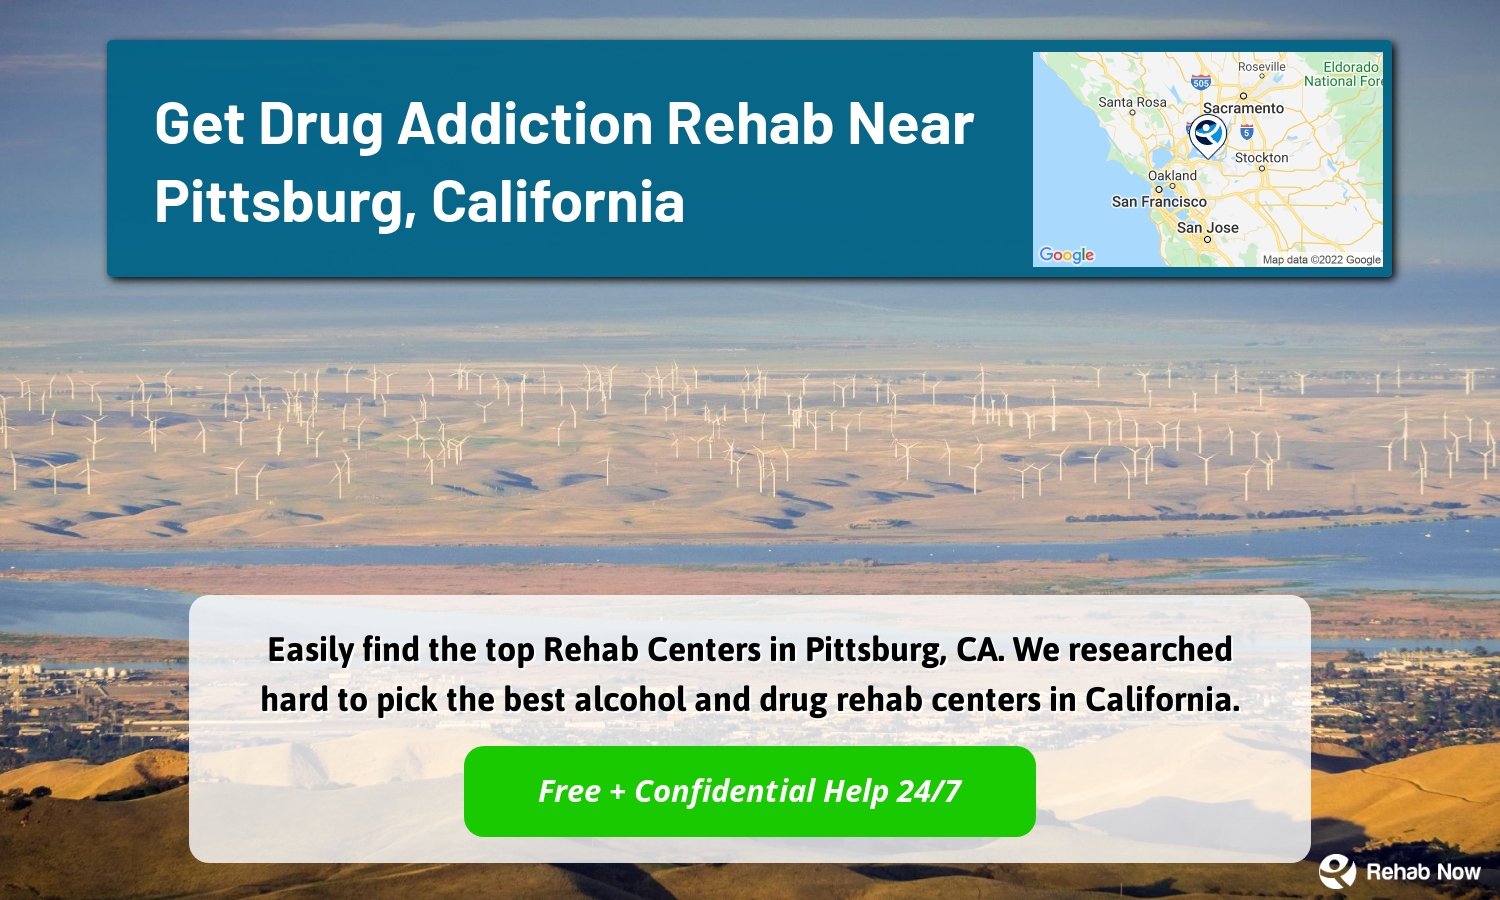 Easily find the top Rehab Centers in Pittsburg, CA. We researched hard to pick the best alcohol and drug rehab centers in California.